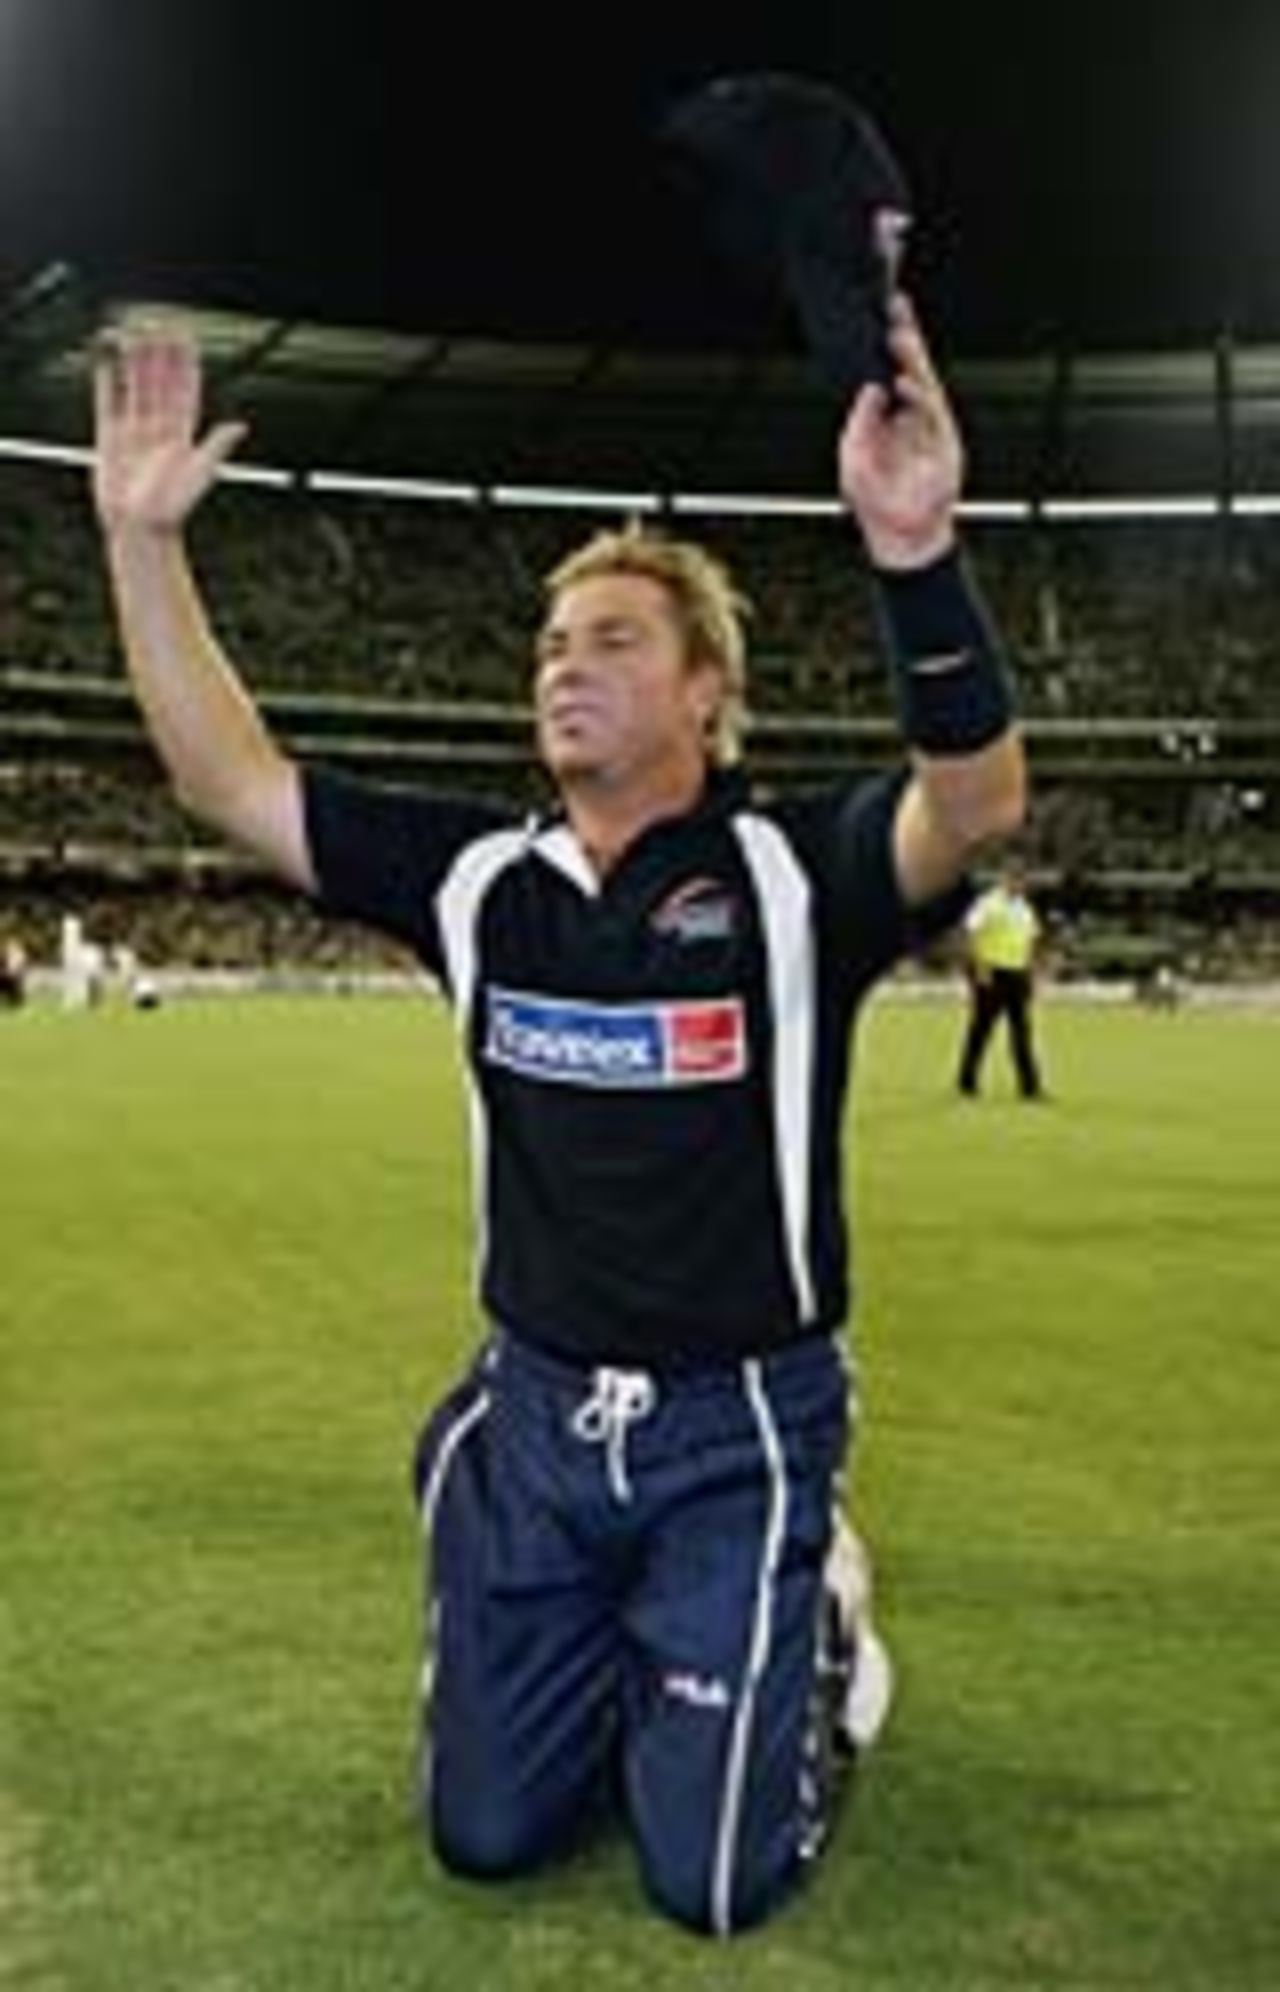 Shane Warne, on his knees, thanks the crowd, ICC World XI v ACC Asia XI ODI, Melbourne, January 10 2005